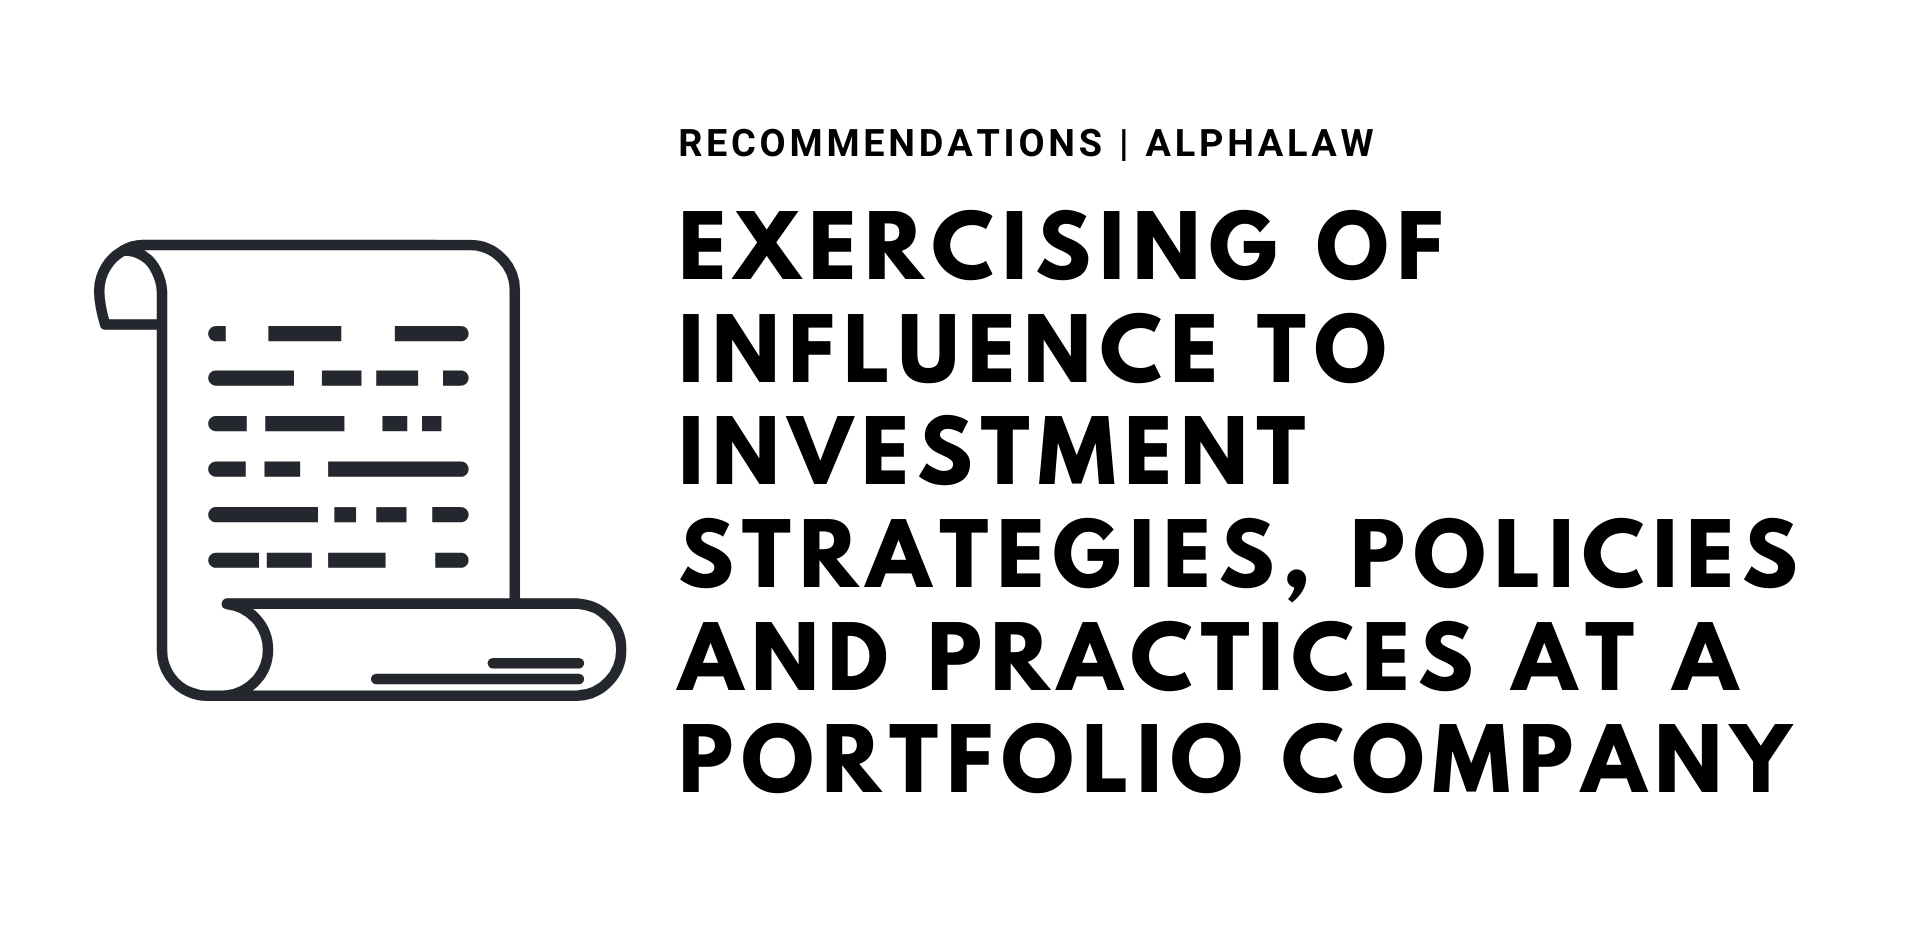 Exercising of Influence to Investment Strategies, Policies and Practices at a Portfolio Company